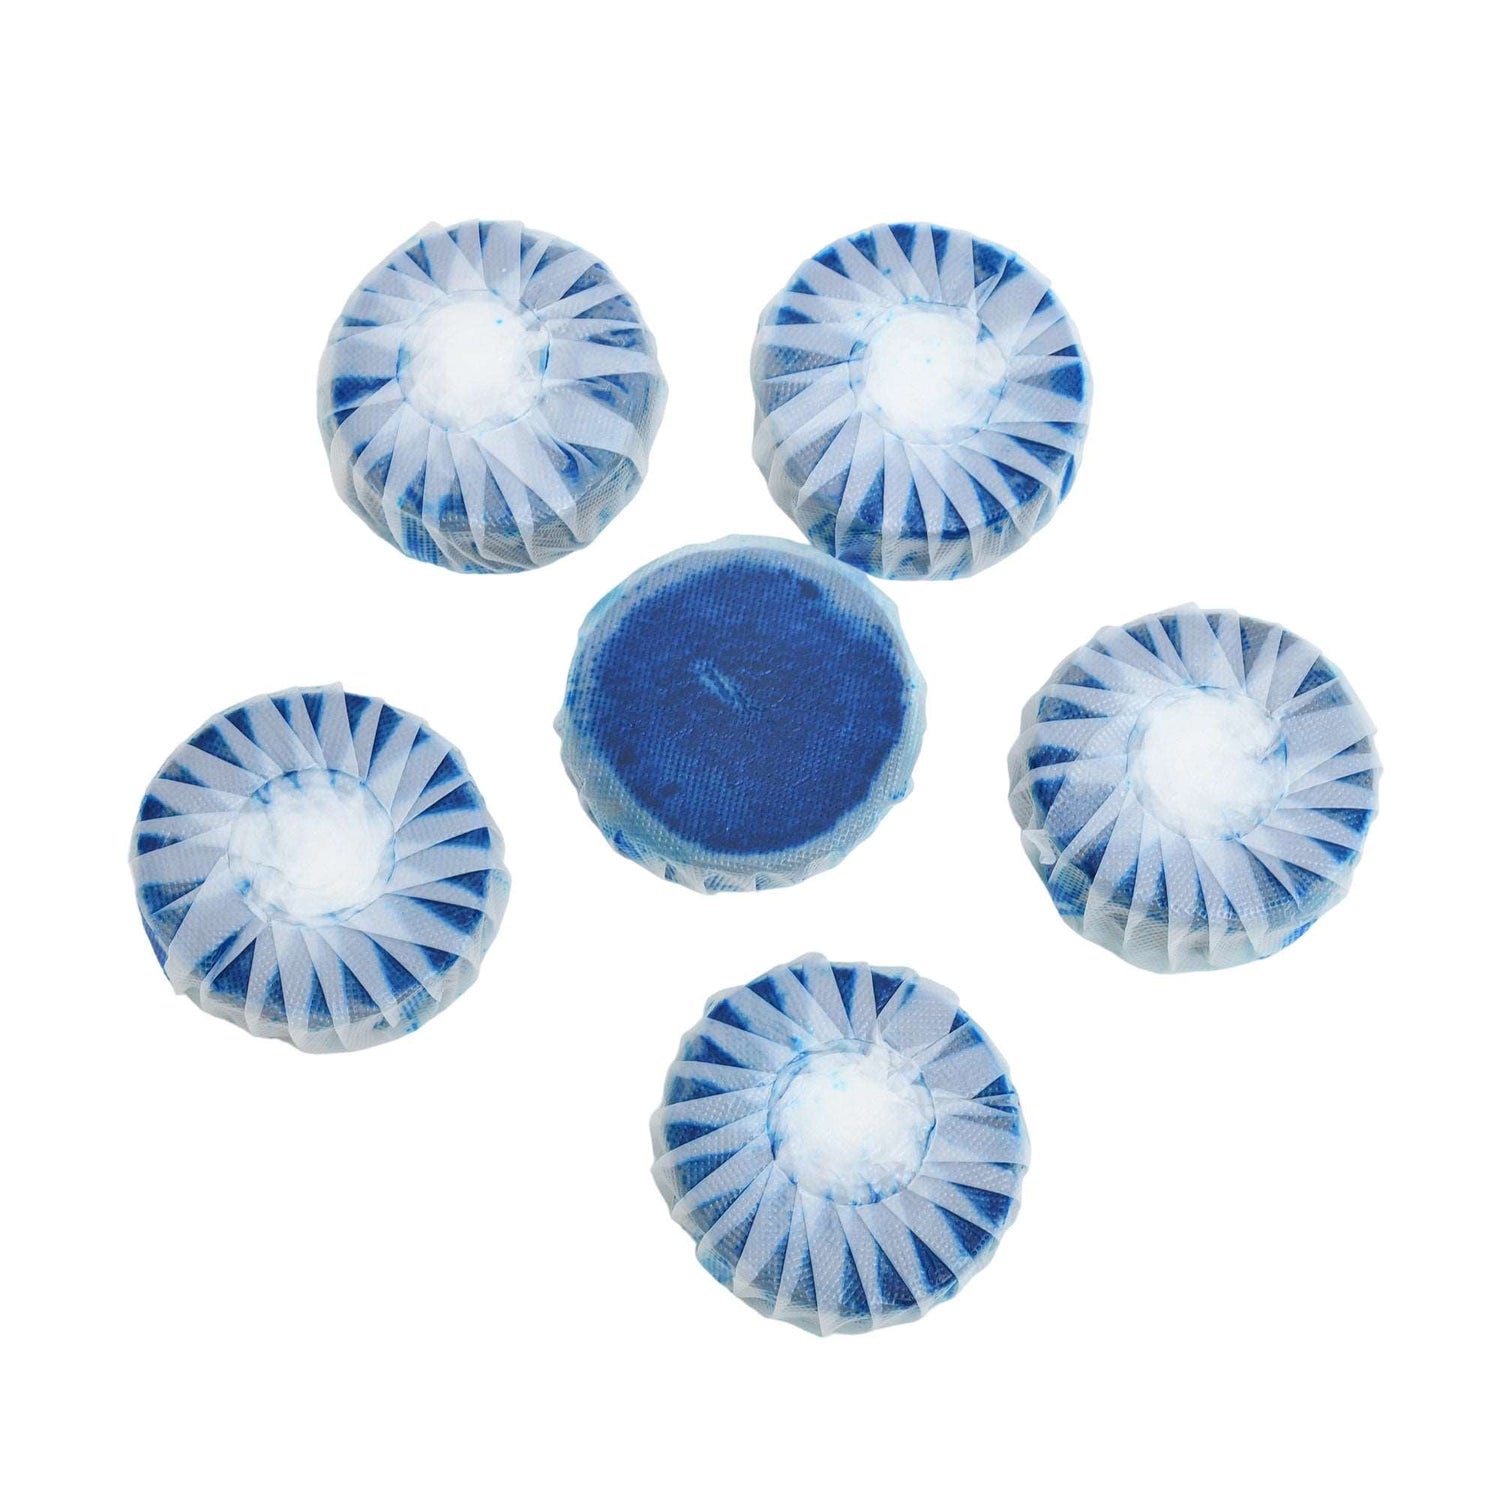 Blue Bubble Toilet Bowl Cleaner - Pack of 6 Mumuso